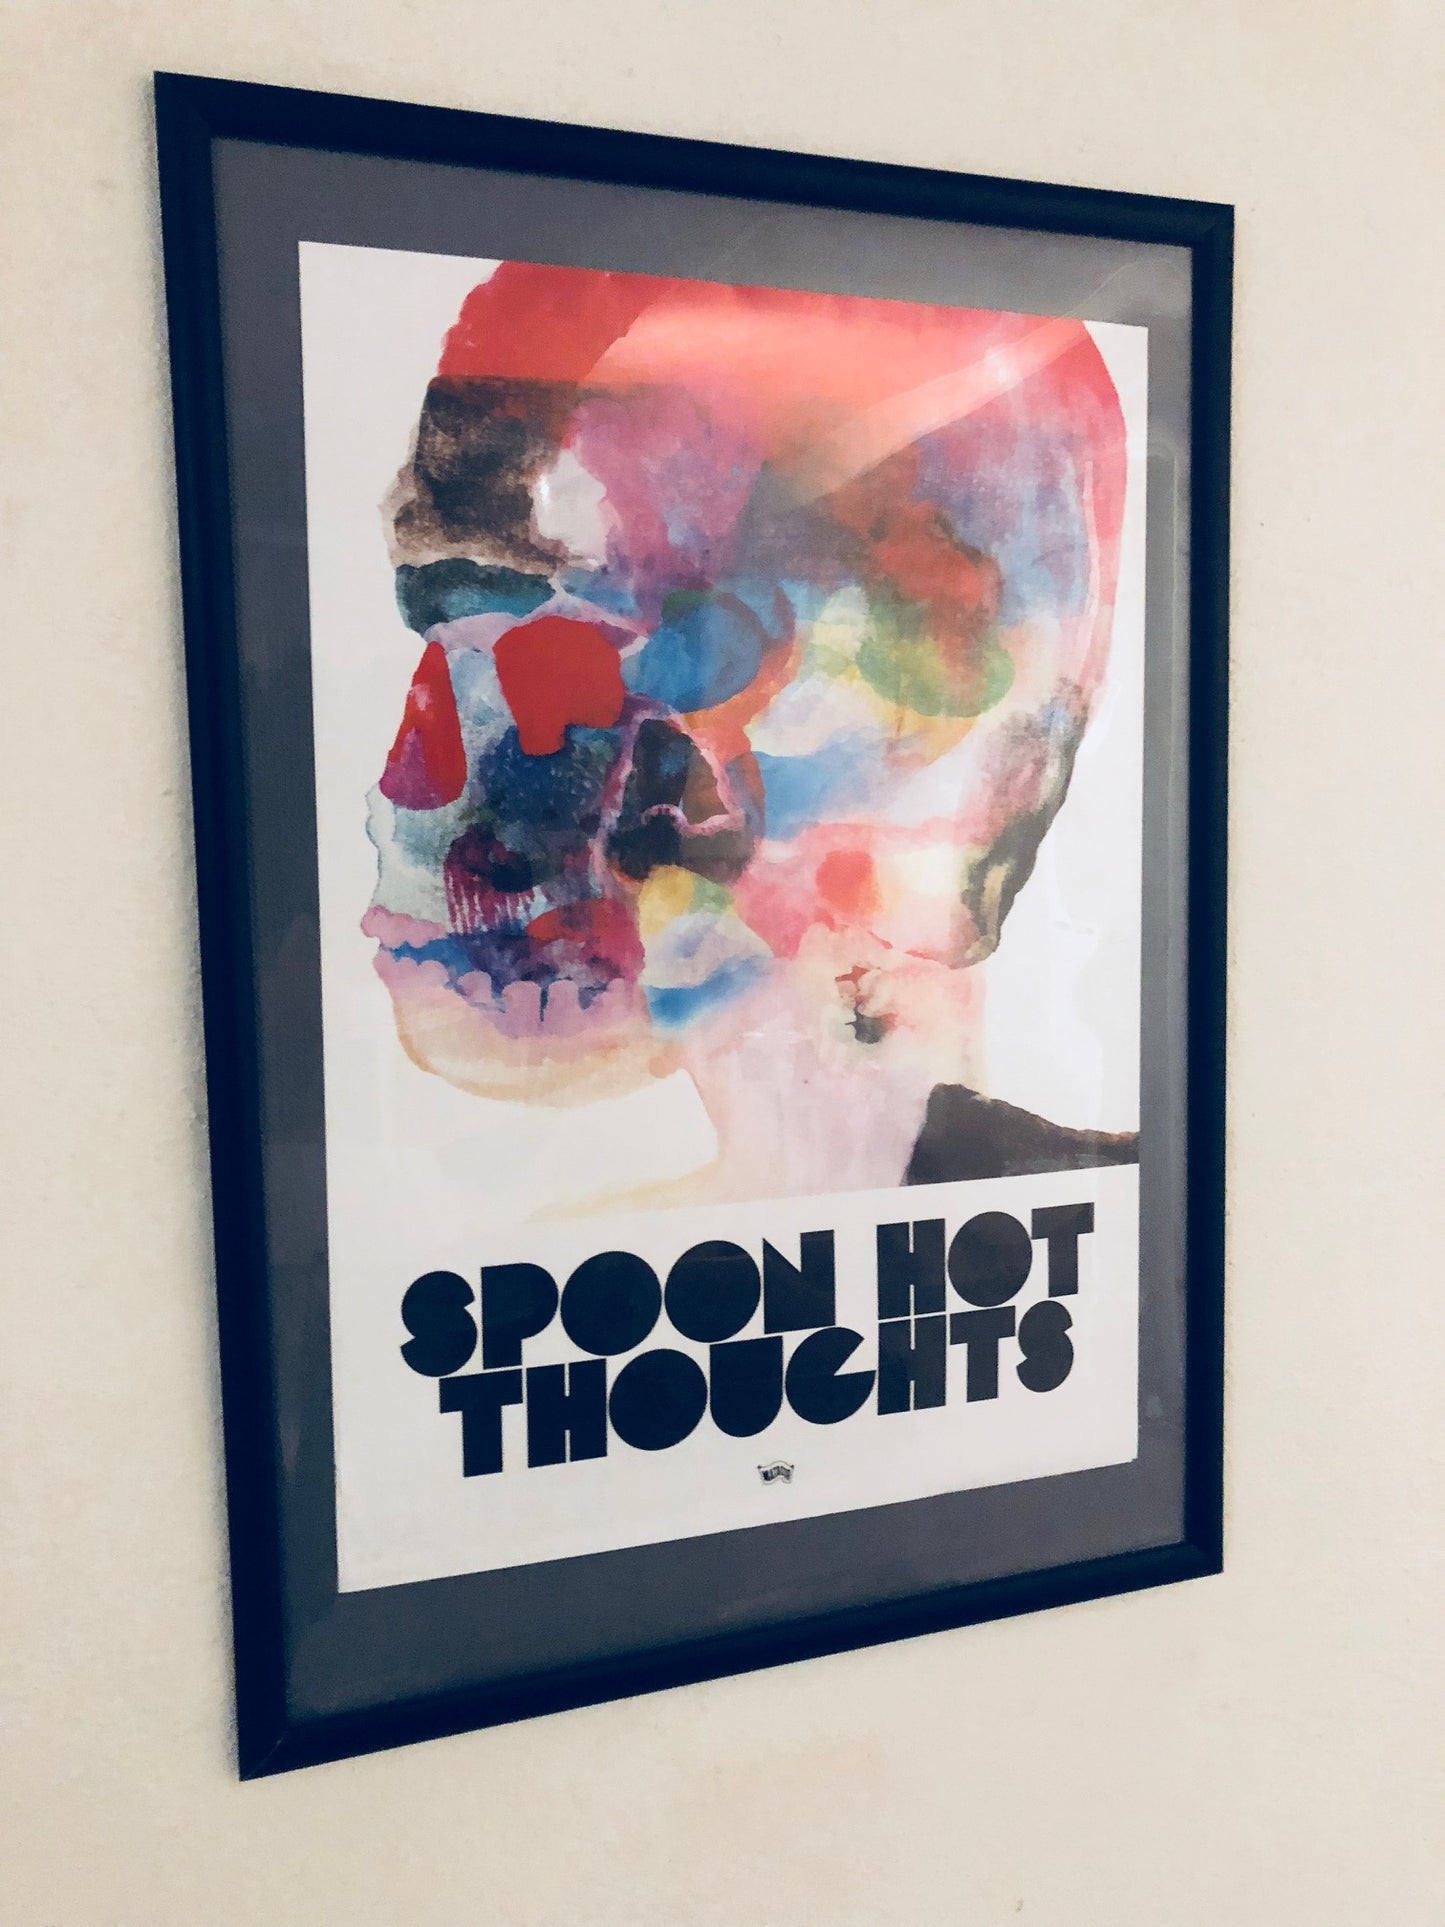 Spoon - Hot Thoughts - Poster